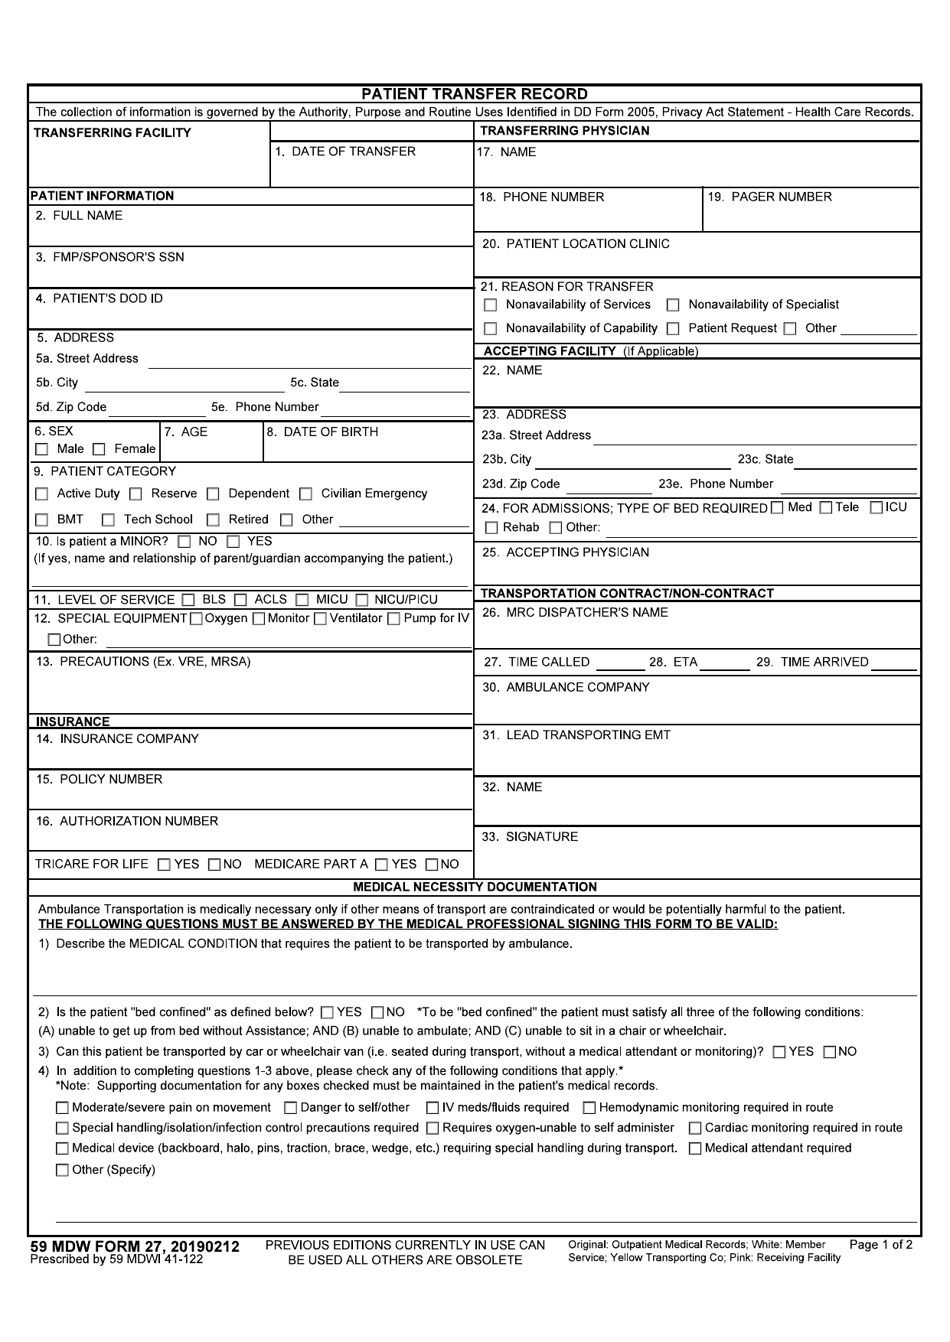 59 MDW Form 27 Patient Transfer Record, Page 1